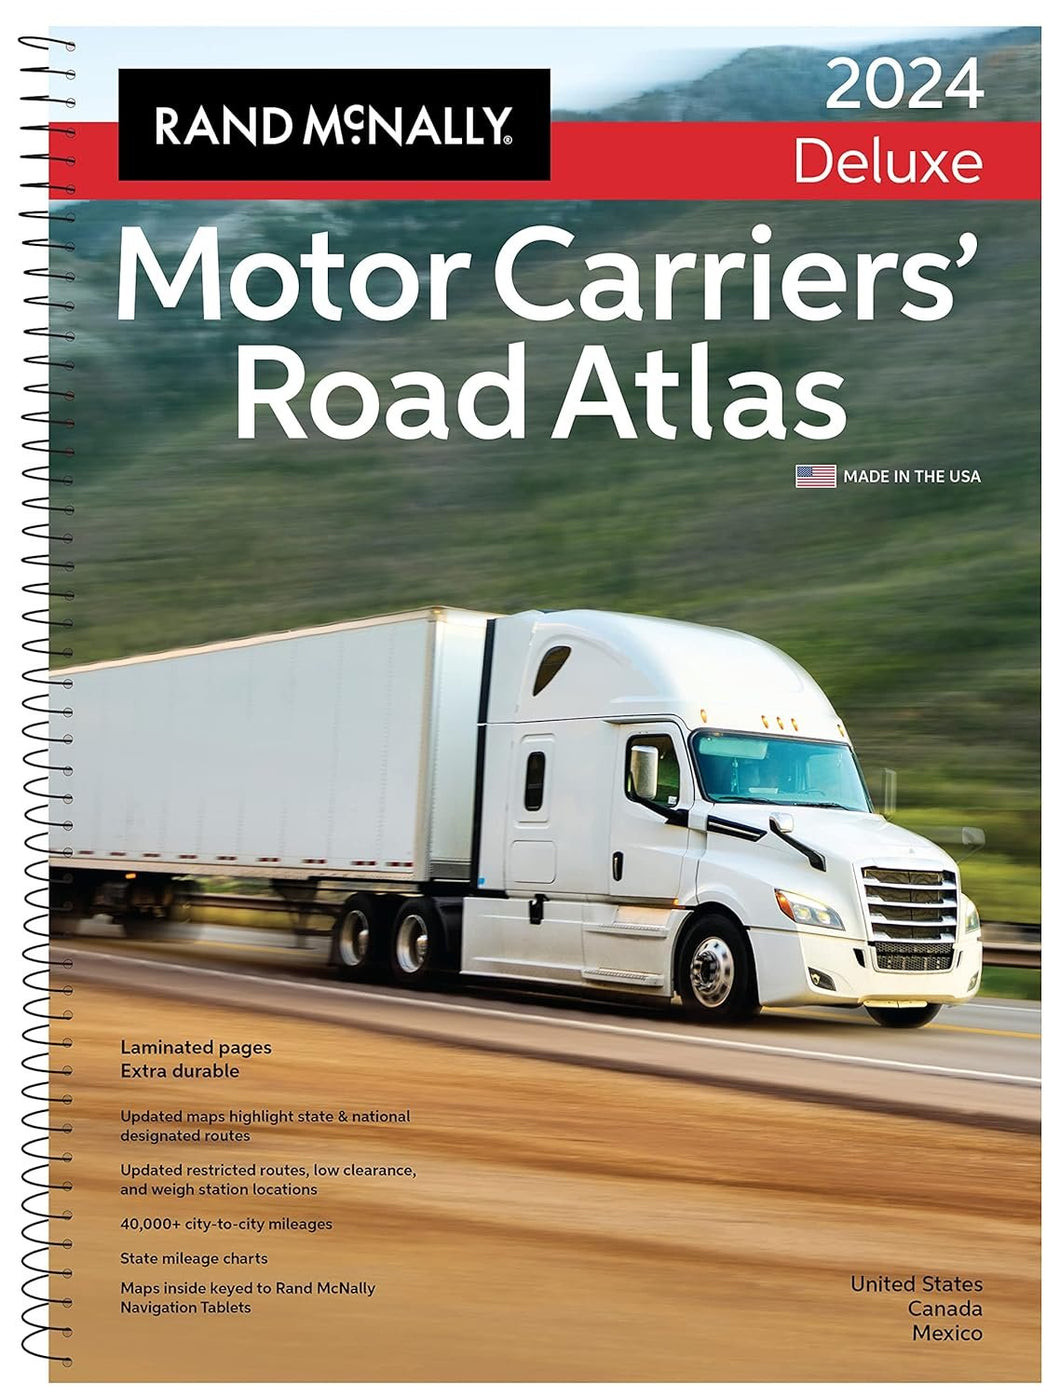 Rand McNally 2024 Deluxe Motor Carriers' Road Atlas: United States, Canada, Mexico (Rand McNally Motor Carriers' Road Atlas)